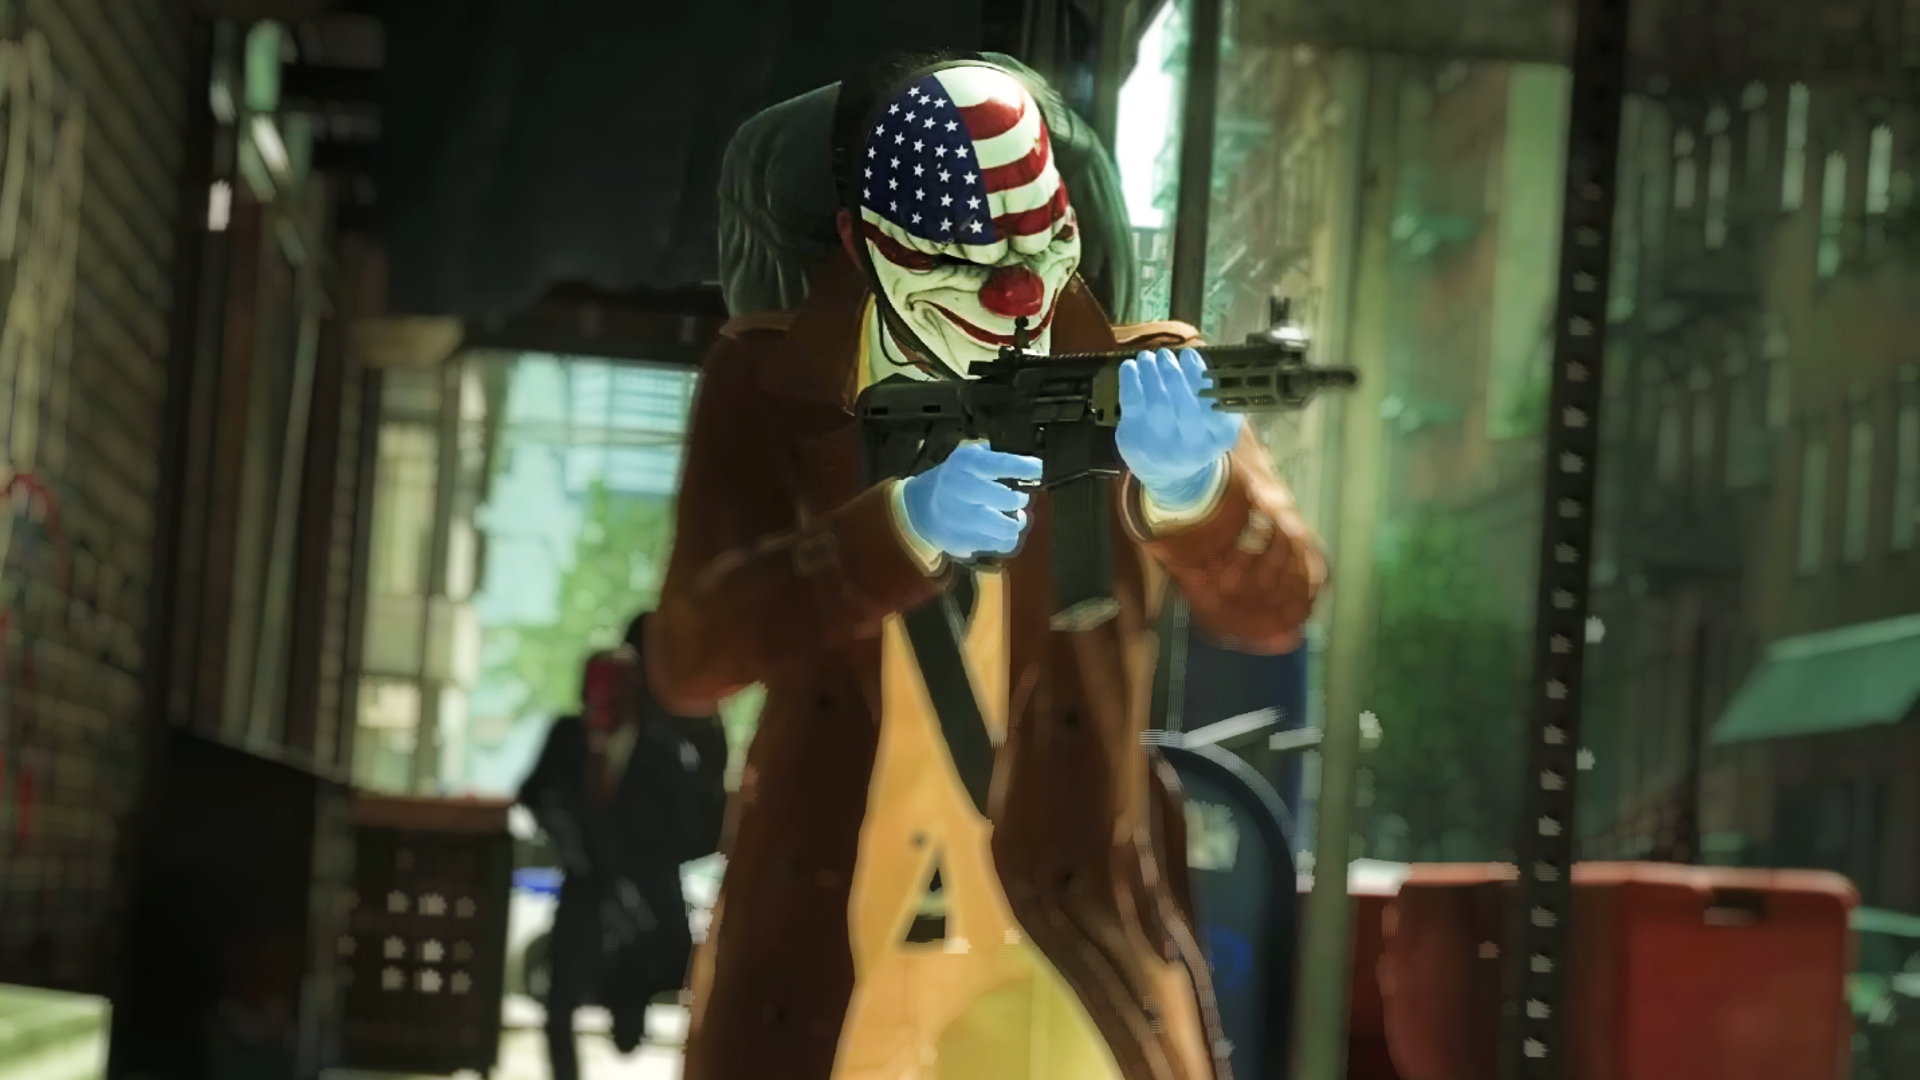 PAYDAY 3 releases new 'Stealth' Gameplay Trailer